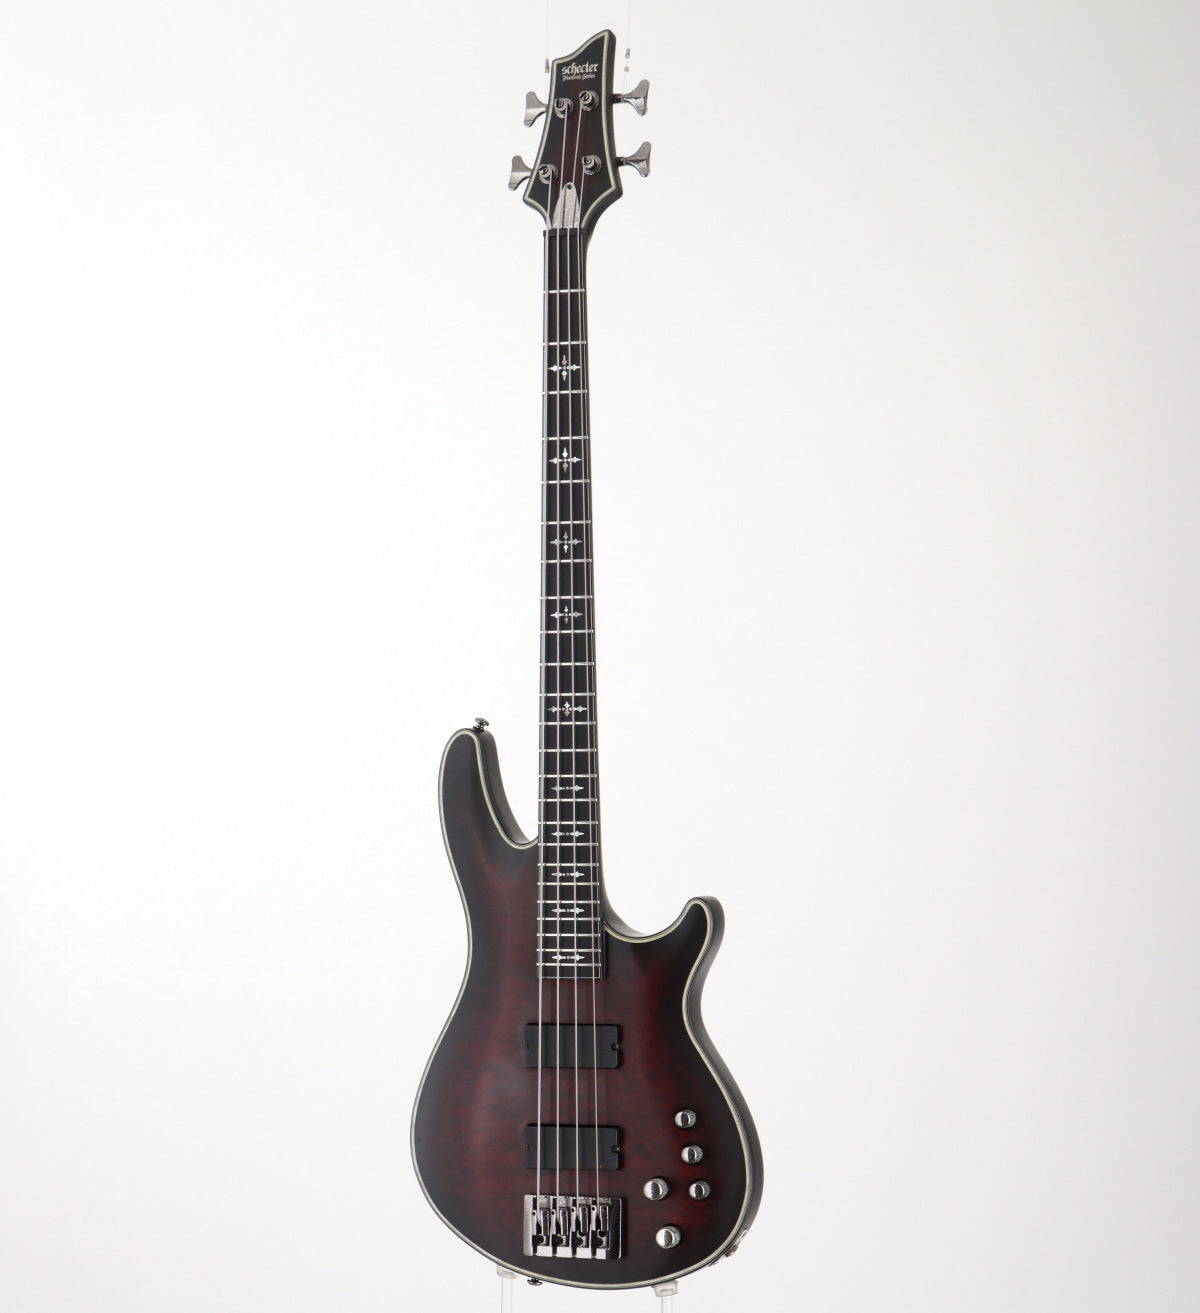 [SN W14030474] USED SCHECTER / AD-HR-EX-BASS-4 HELLRAISER EXTREME 4 CRBS 2014 [08]